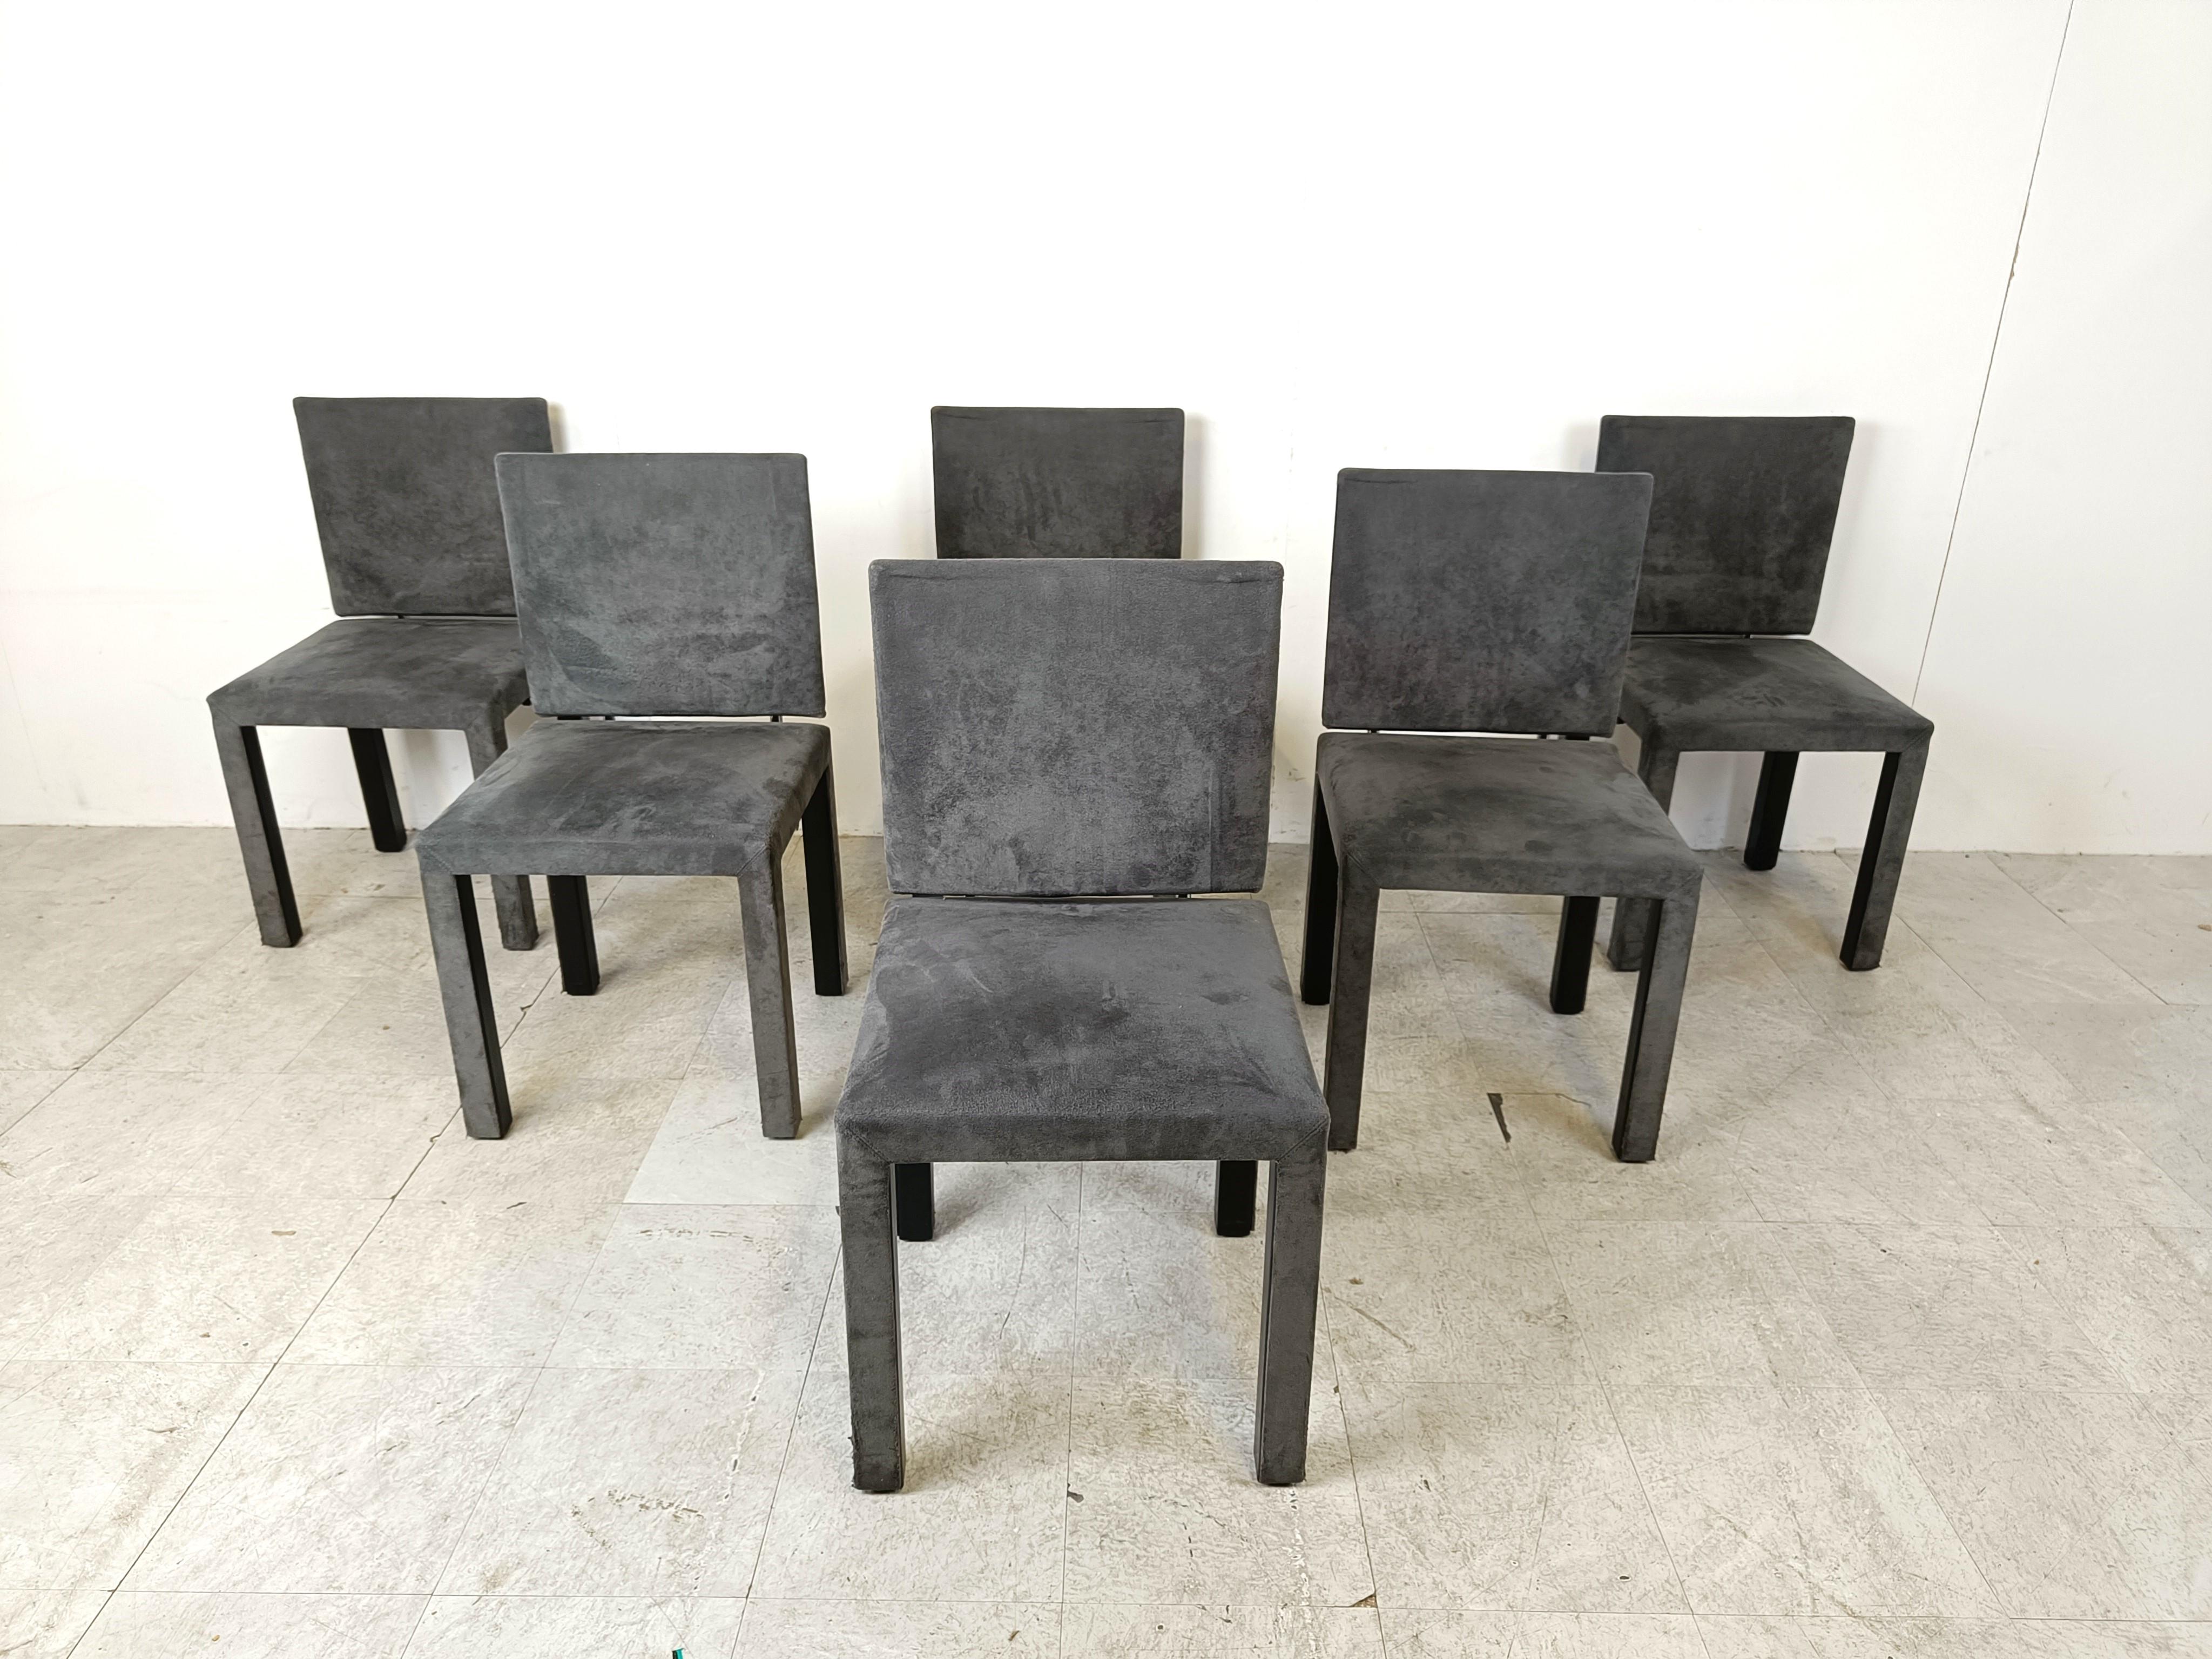 Set of 6 Arcadia dining chairs designed by Paolo Piva for B& B italia's Arcadia series.

Upholstered in grey velvet.

They are very comfortable and the angle of the backrests can be slightly adjusted.

Good condition

1980s -